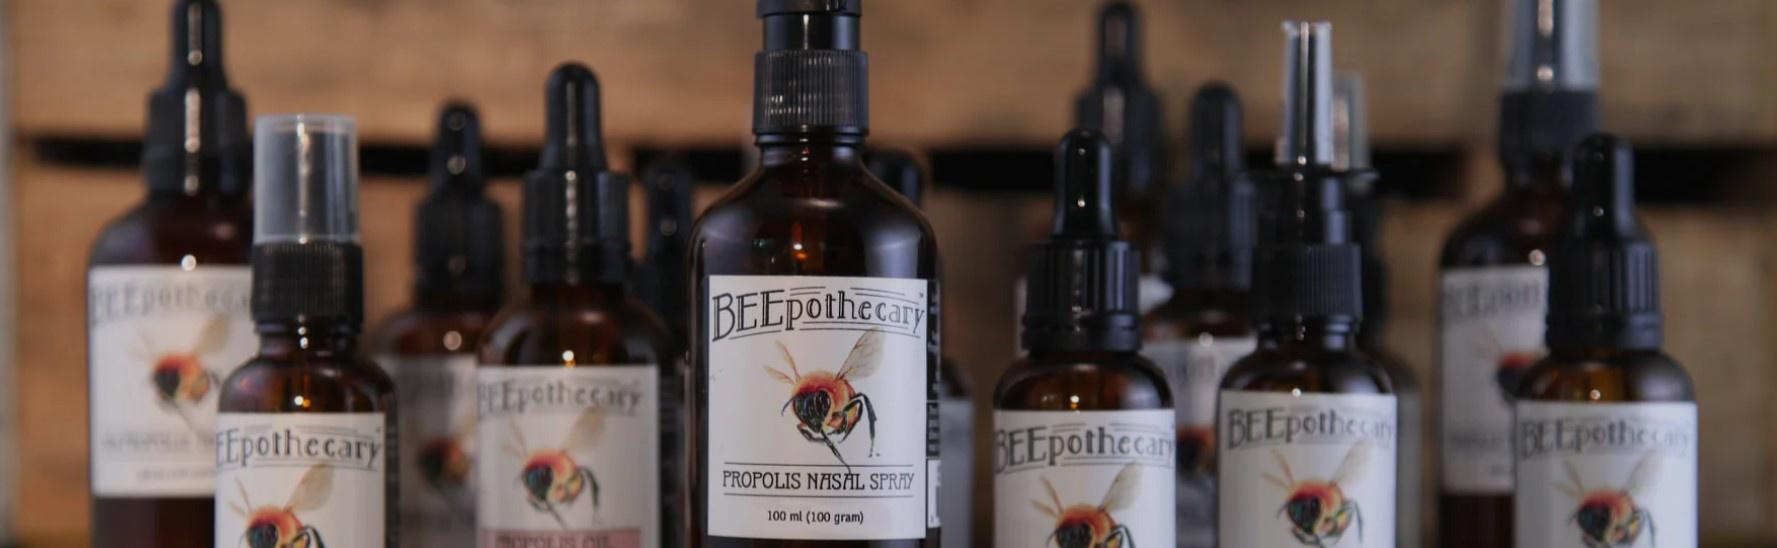 Beepothecary Introduces Premium Propolis Tincture Line: Elevating Natural Health Solutions